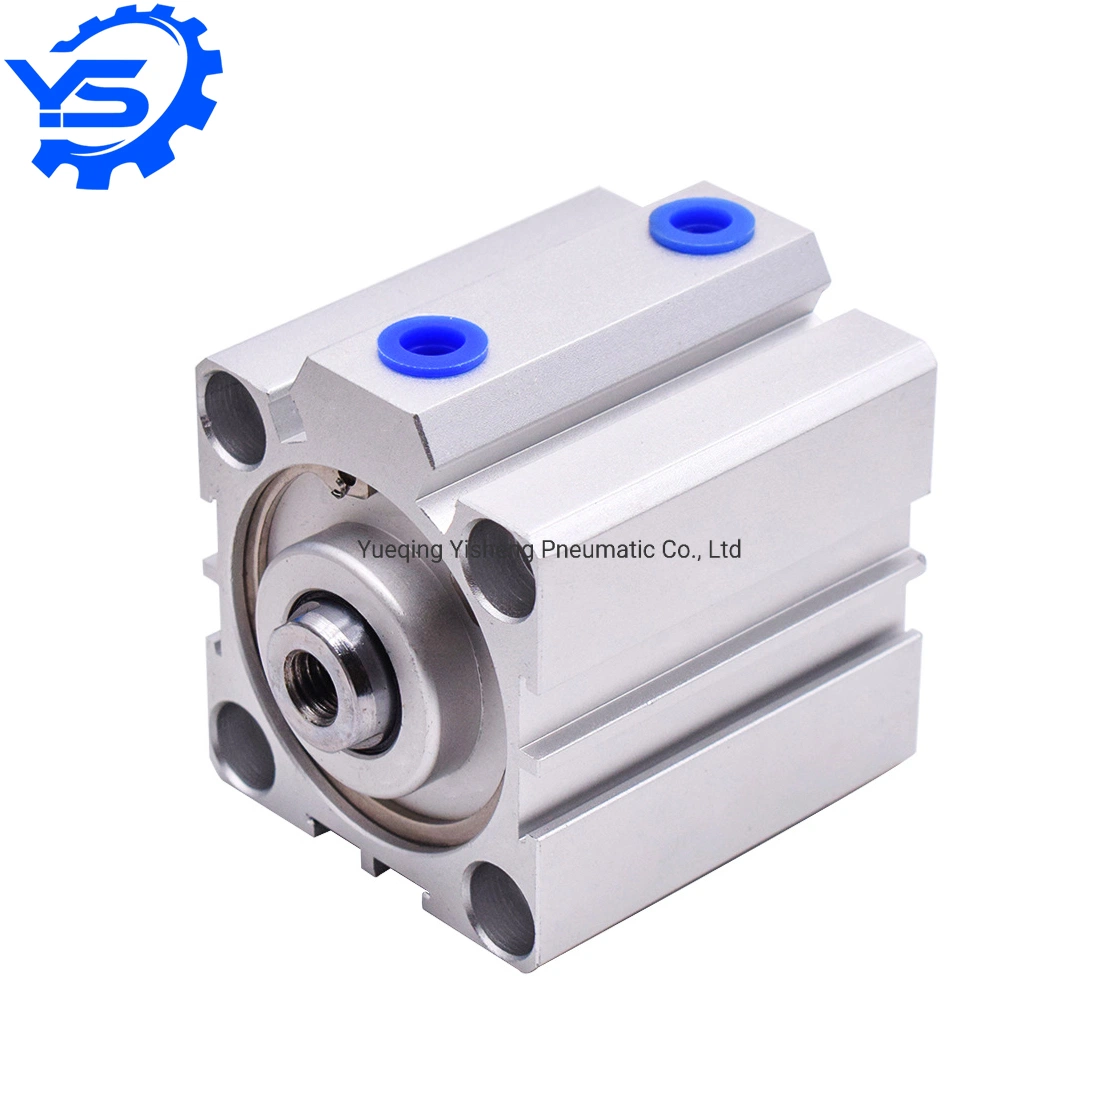 Sda Series Aluminum Alloy Double/Single Acting Thin Type Pneumatic Standard Compact Air Cylinder